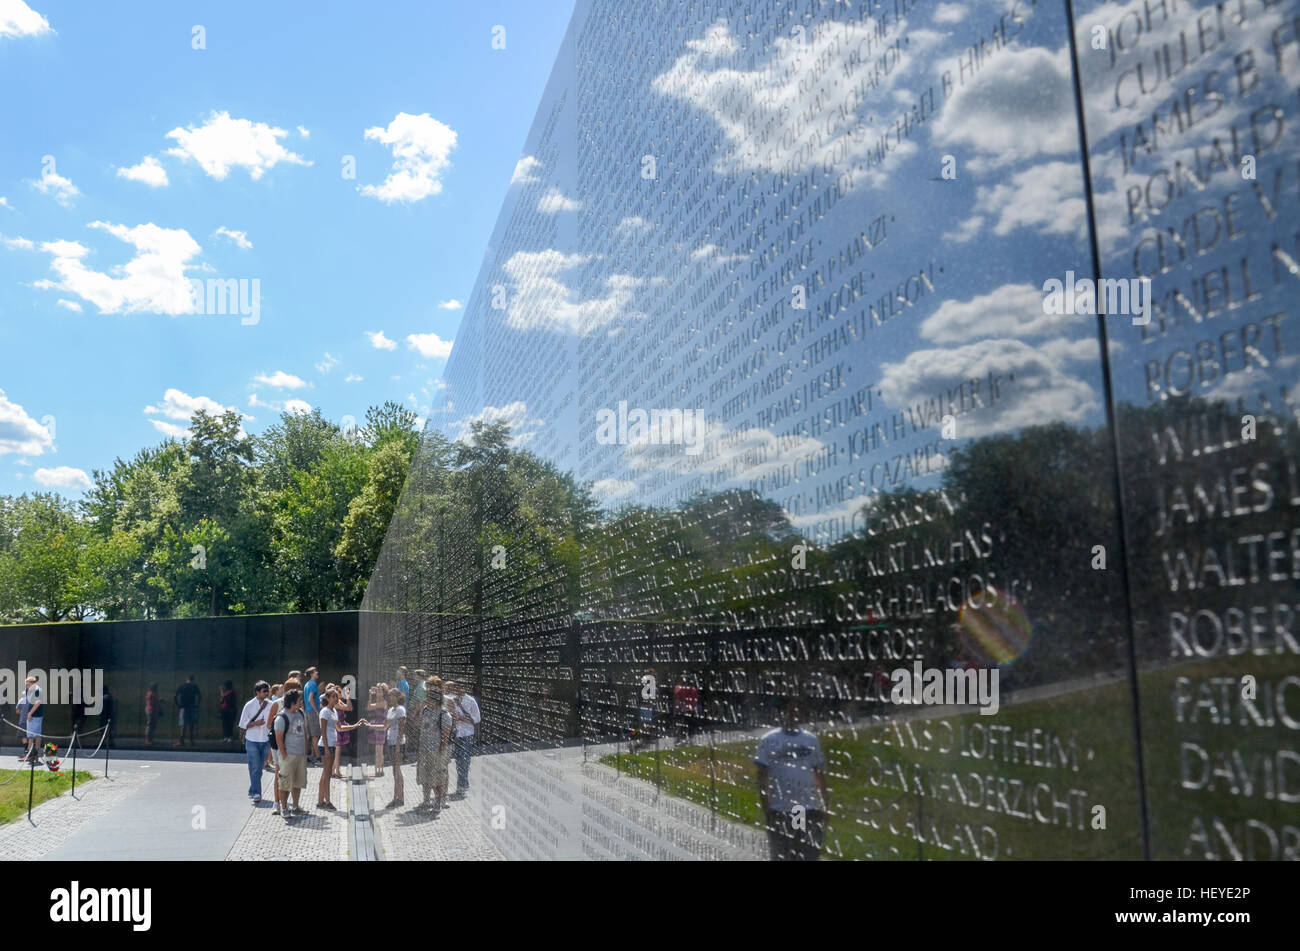 Reflections, people, and objects at the Wall of the Vietnam Veterans Memorial in Washington, DC. Stock Photo